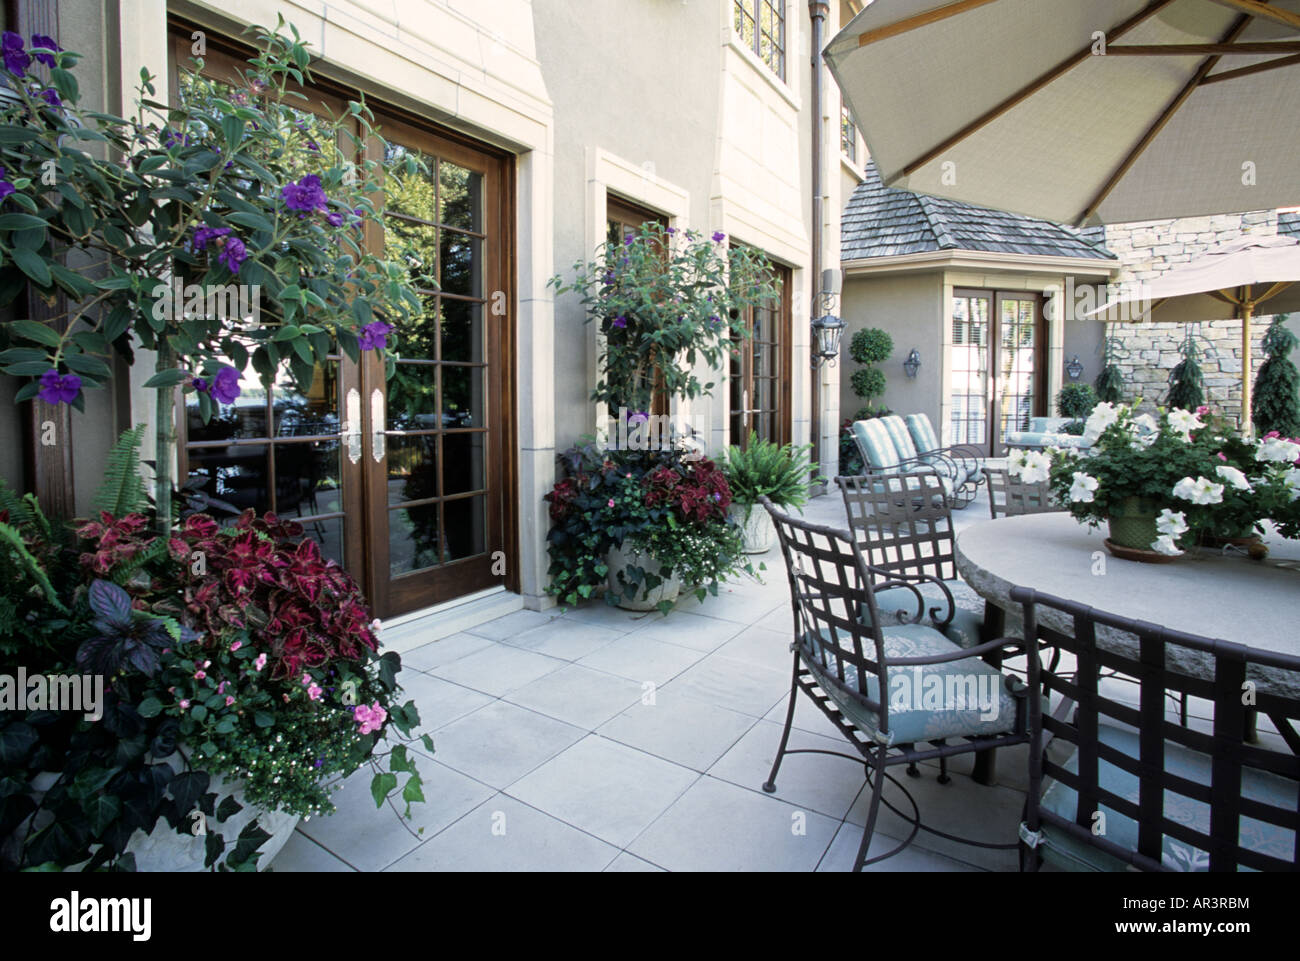 PATIO OF UPSCALE MINNESOTA HOME DECORATED WITH CONTAINER AND HANGING PLANTS TO ADD COLOR.  SUMMER.  AMERICA. Stock Photo